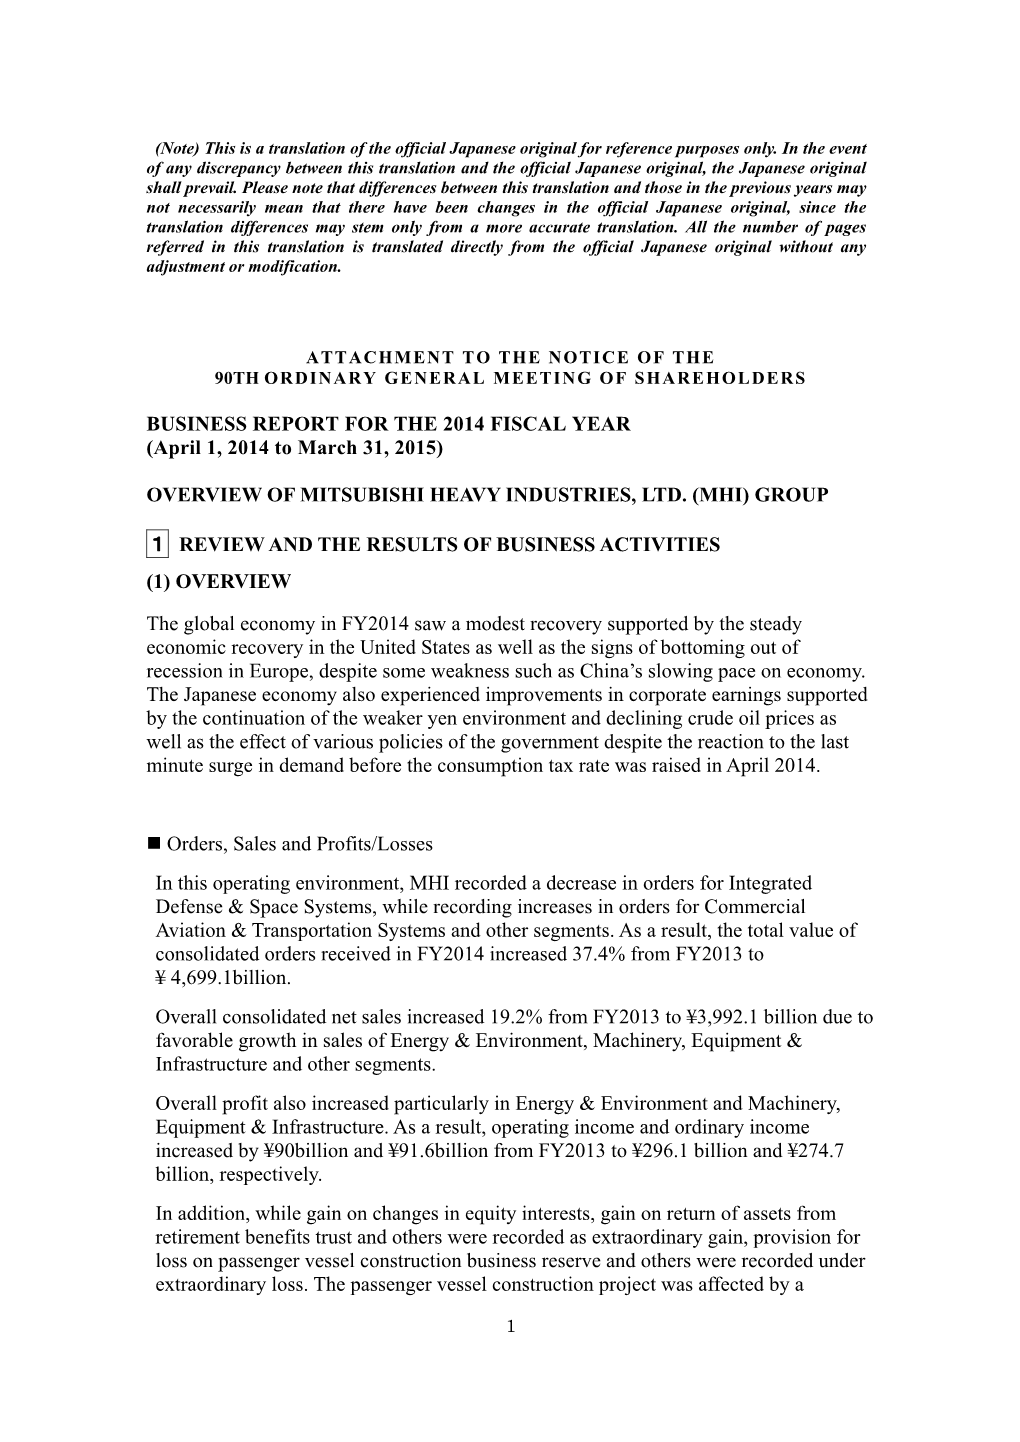 Business Report for the 2014 Fiscal Year (Attachment to the Notice of the 90Th Ordinary General Meeting of Shareholders)